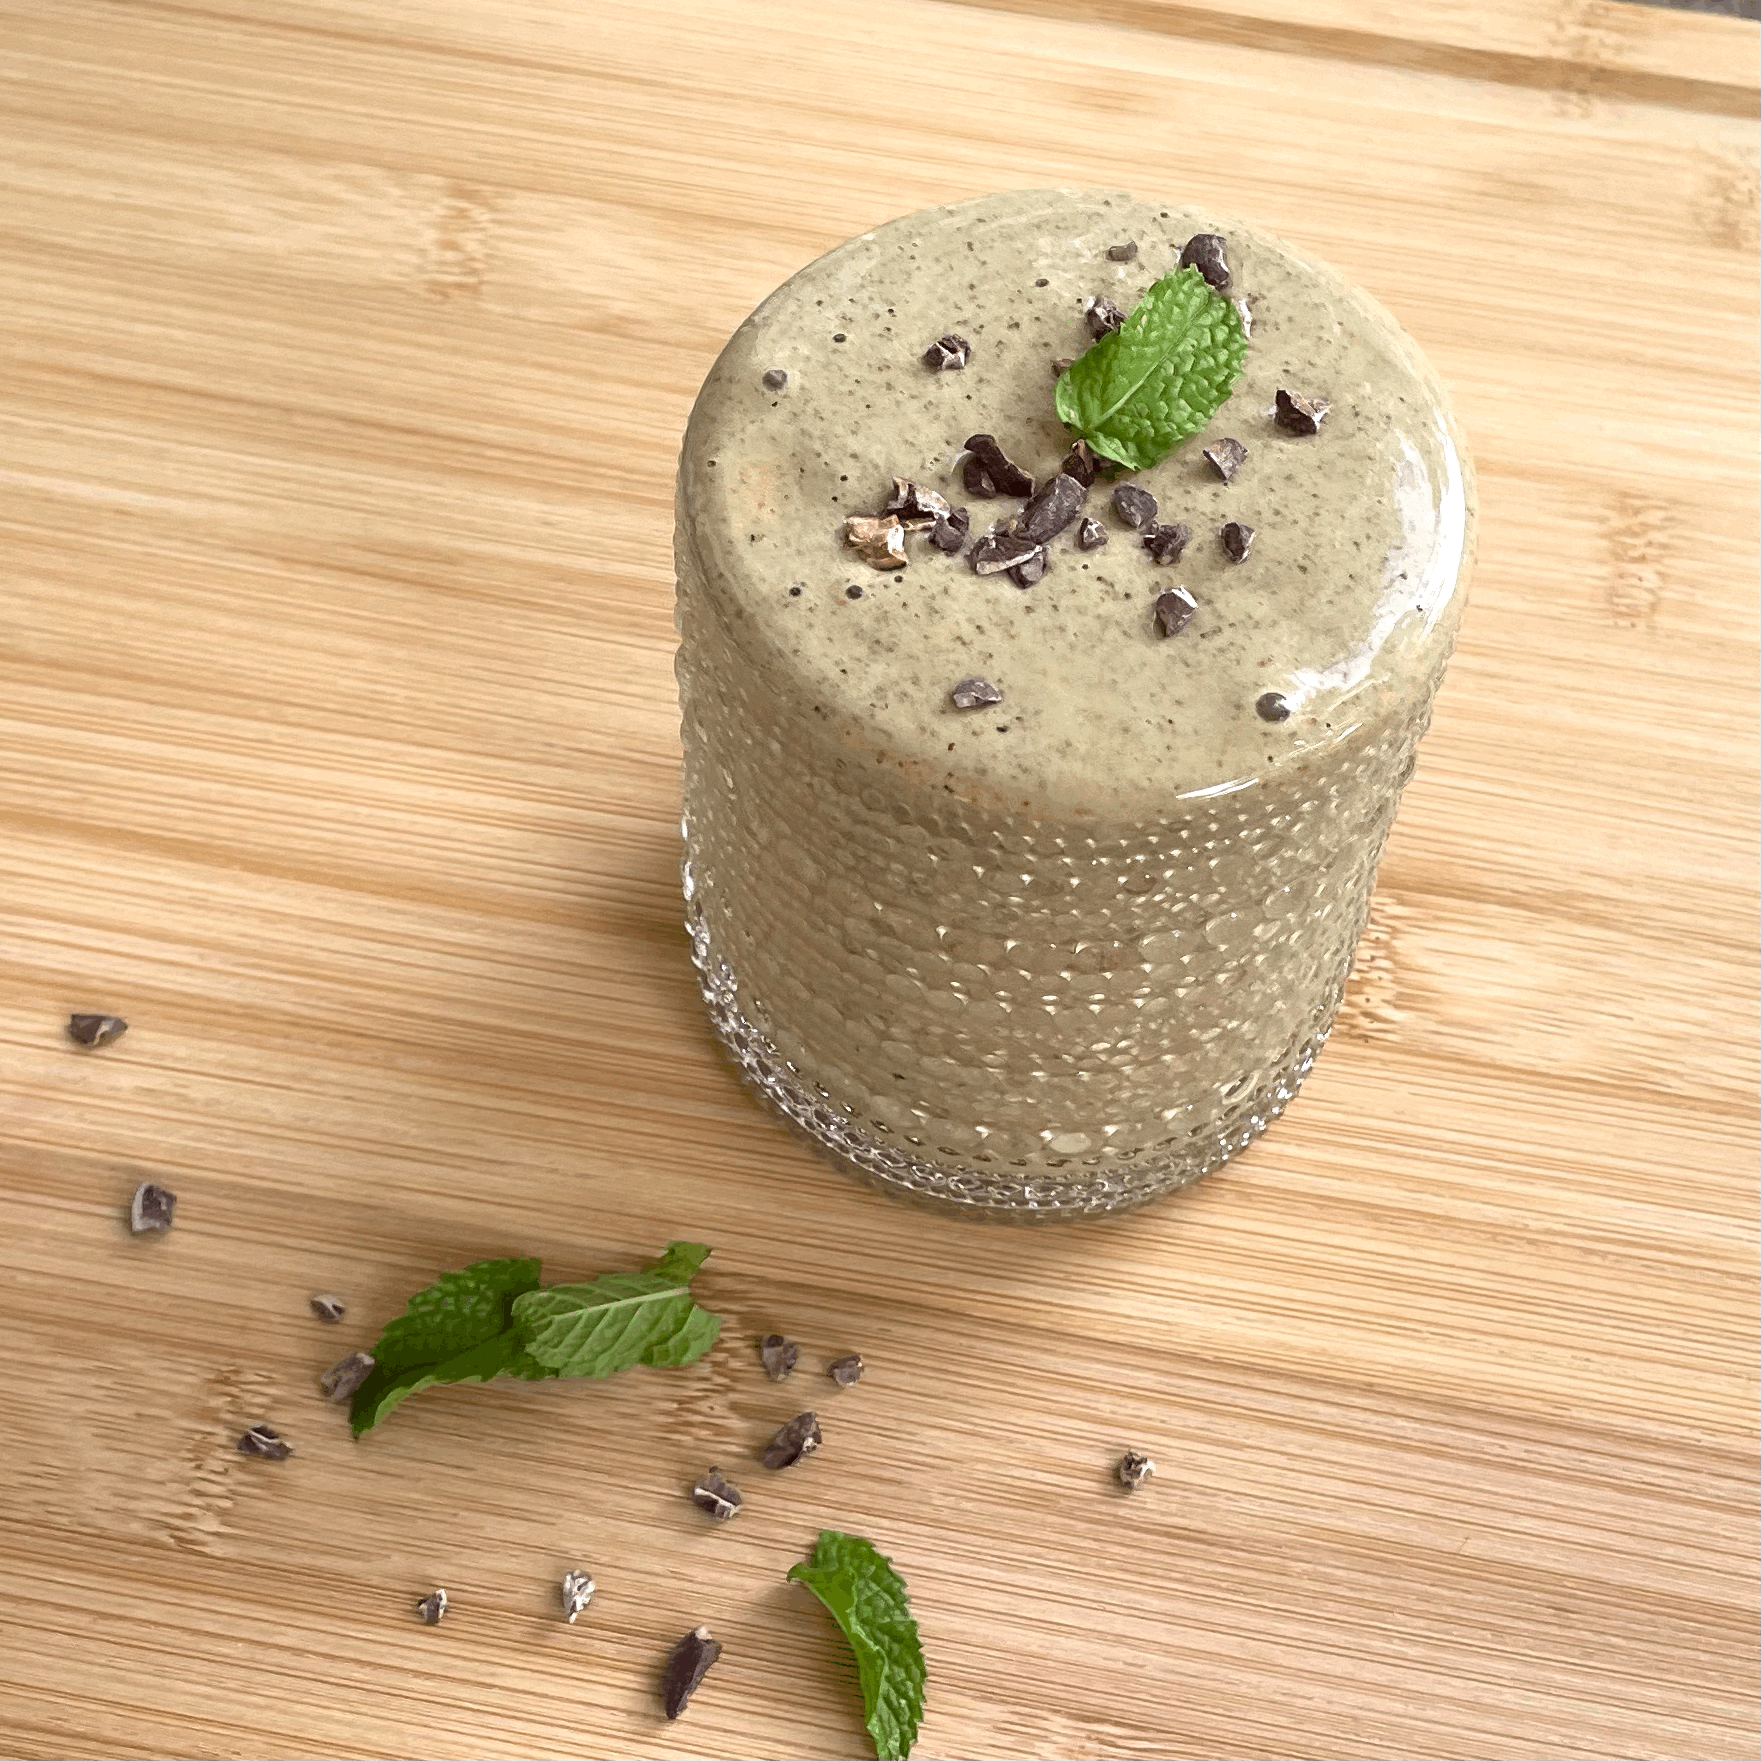 Mint Chip Smoothie!